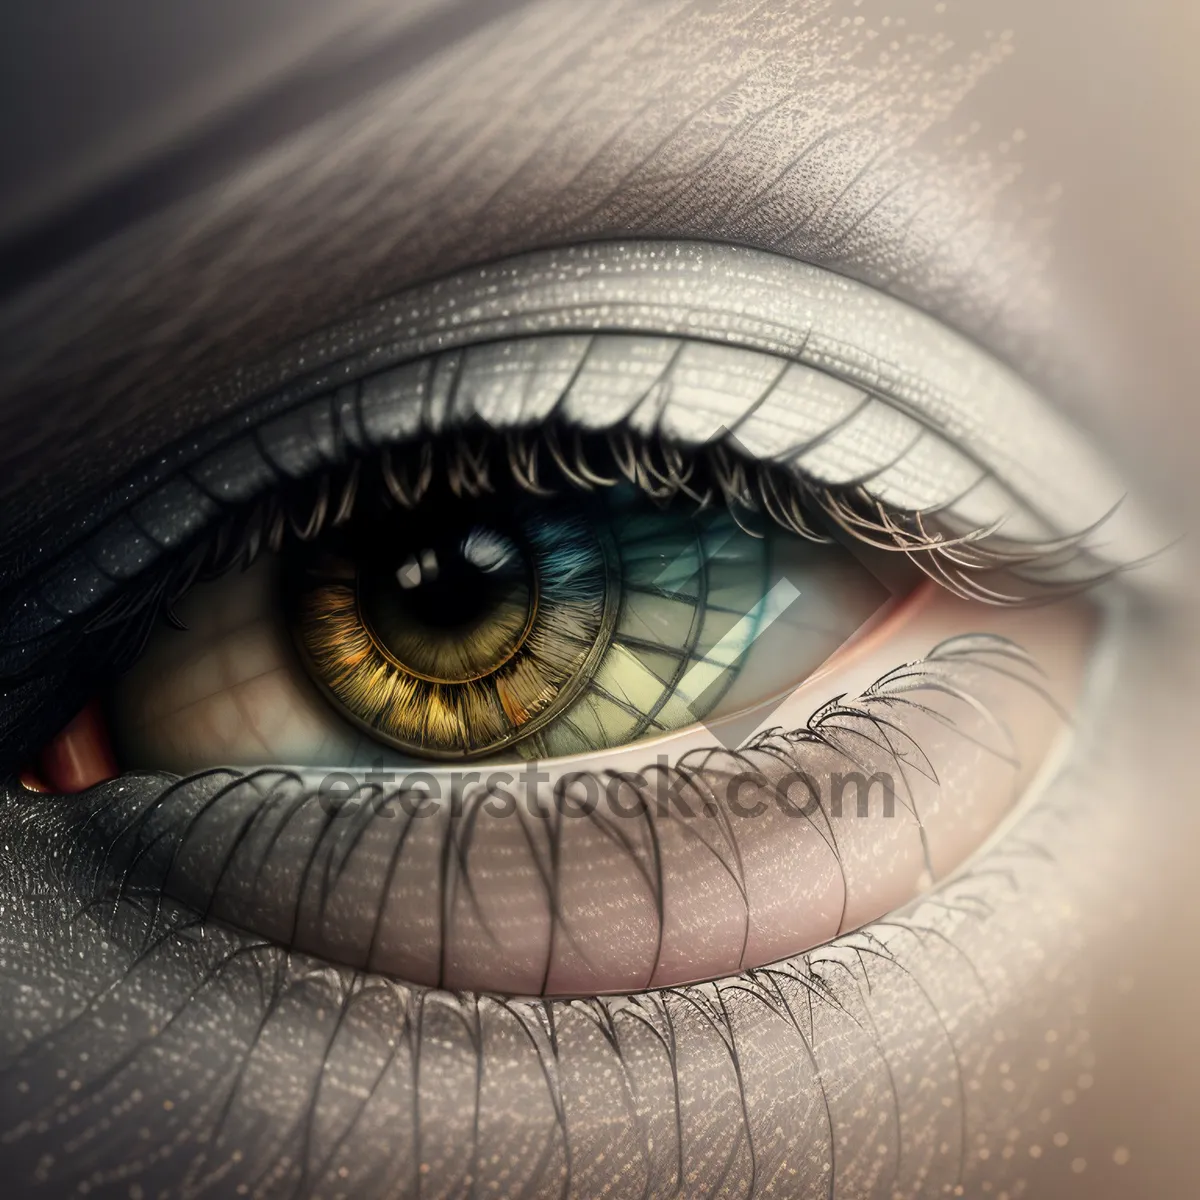 Picture of Captivating Eyebrow and Eye Closeup